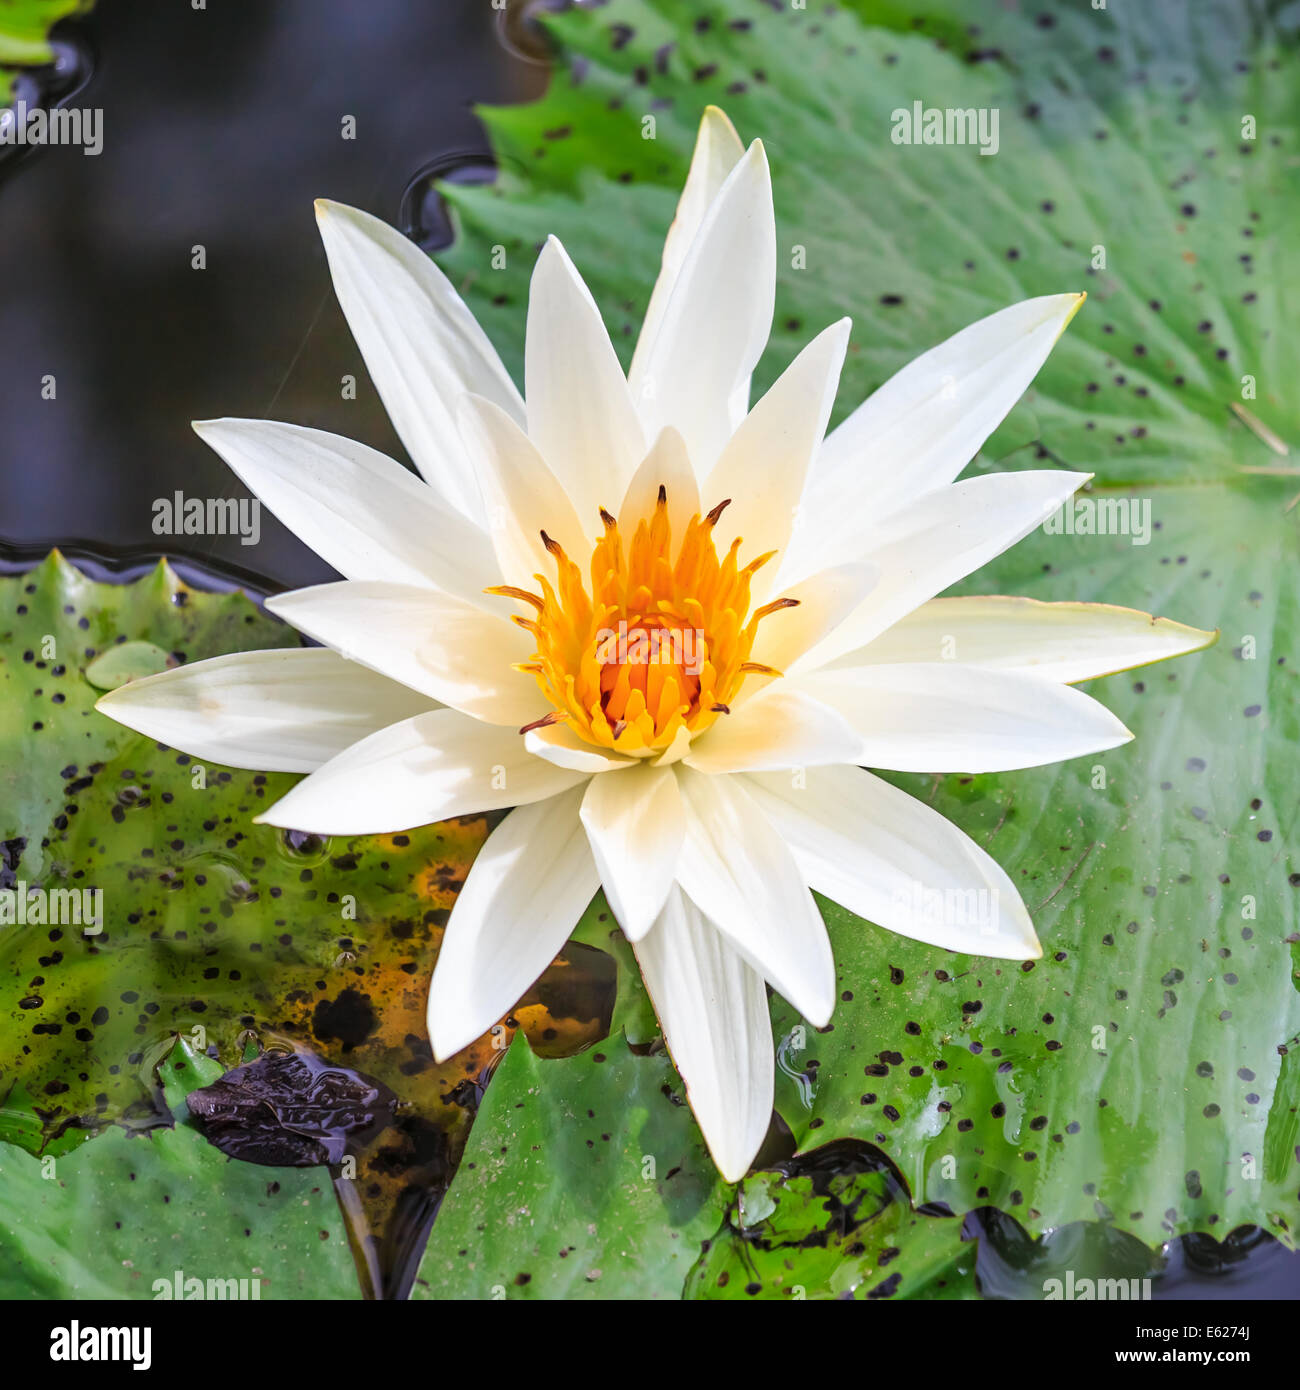 A bloom lotus flower in a pond Stock Photo